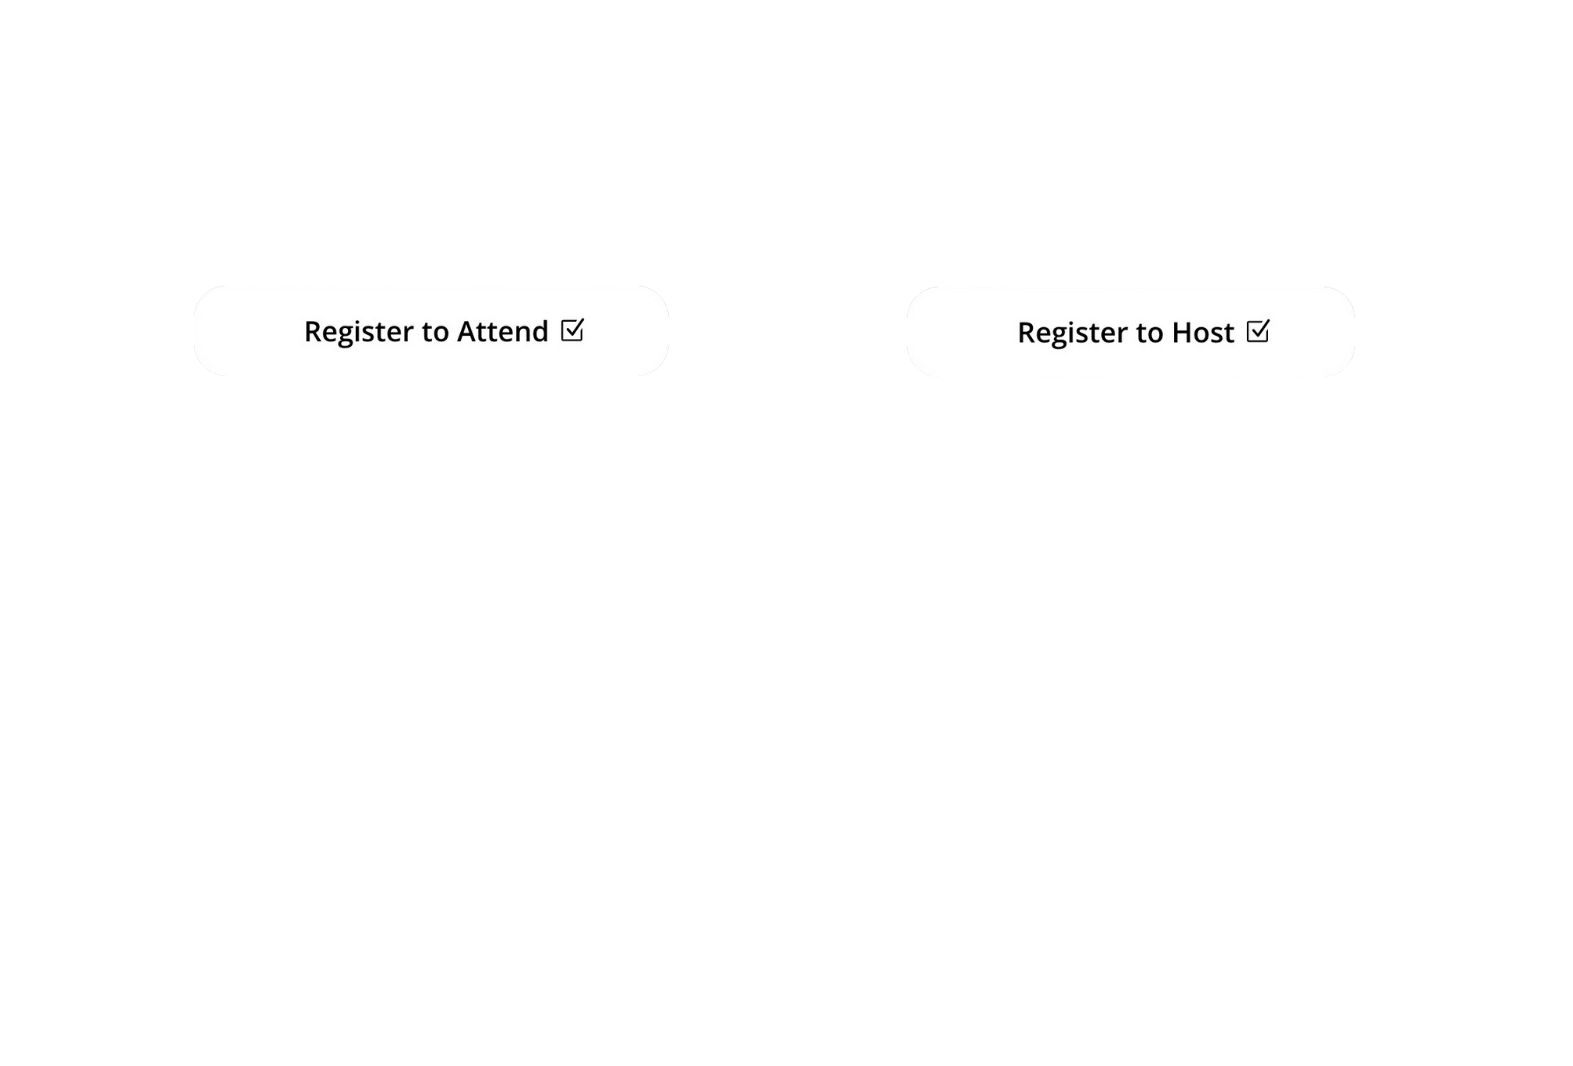 How to Get the Most Out of MisinfoDay 2024